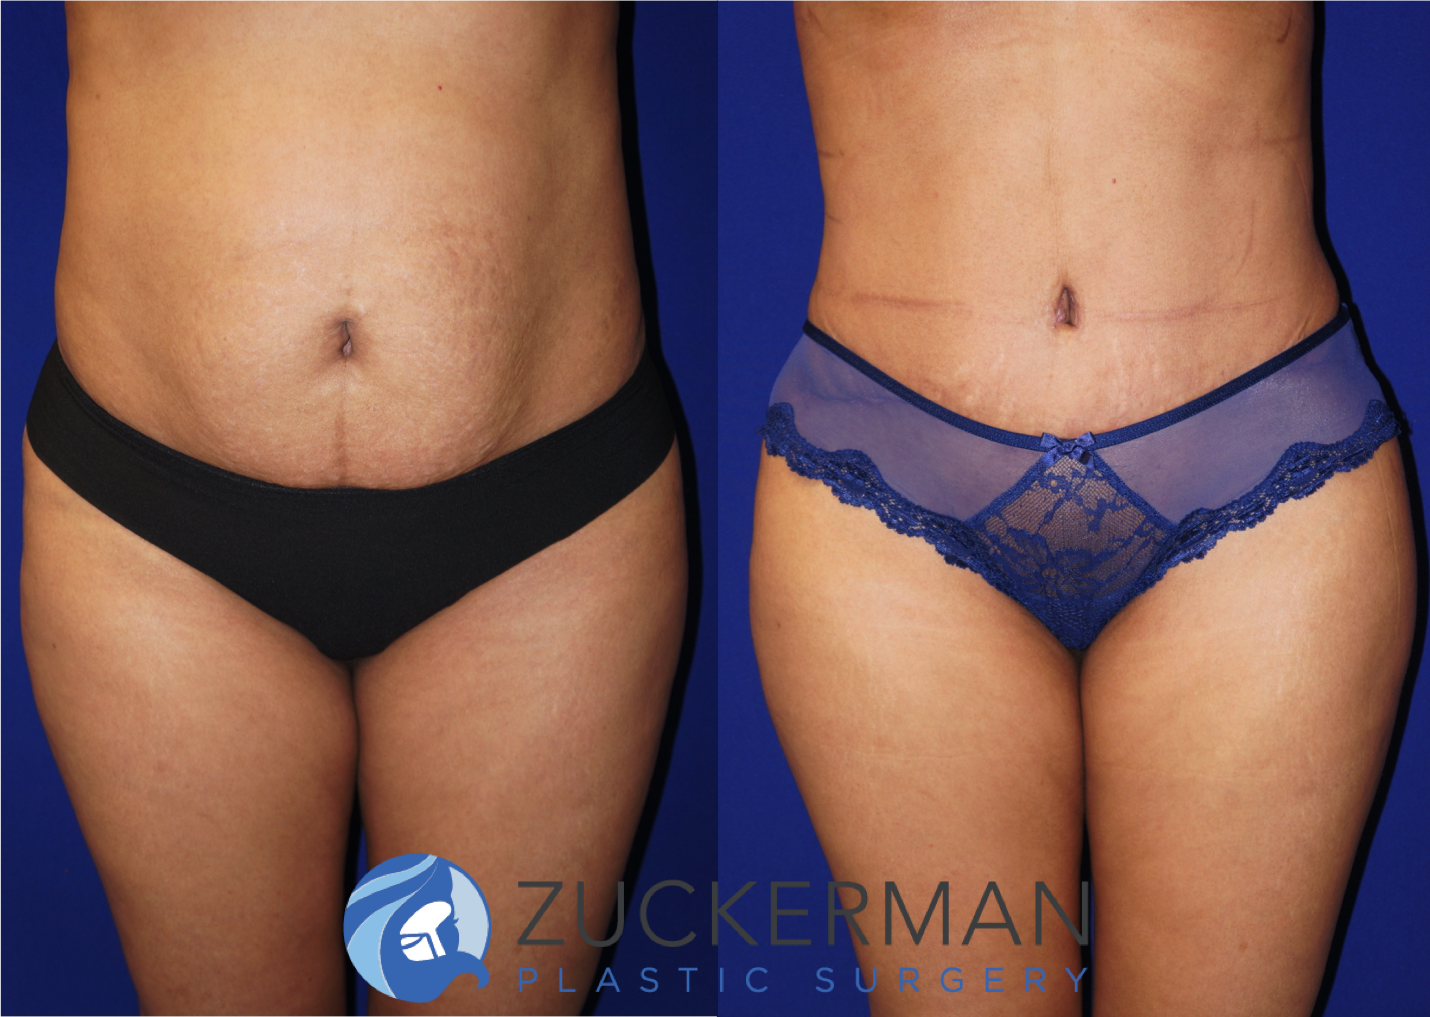 Frontal view of an abdominoplasty (tummy tuck) by Dr. Zuckerman, images taken before surgery and two months after. Includes liposuction to the abdomen and flanks.